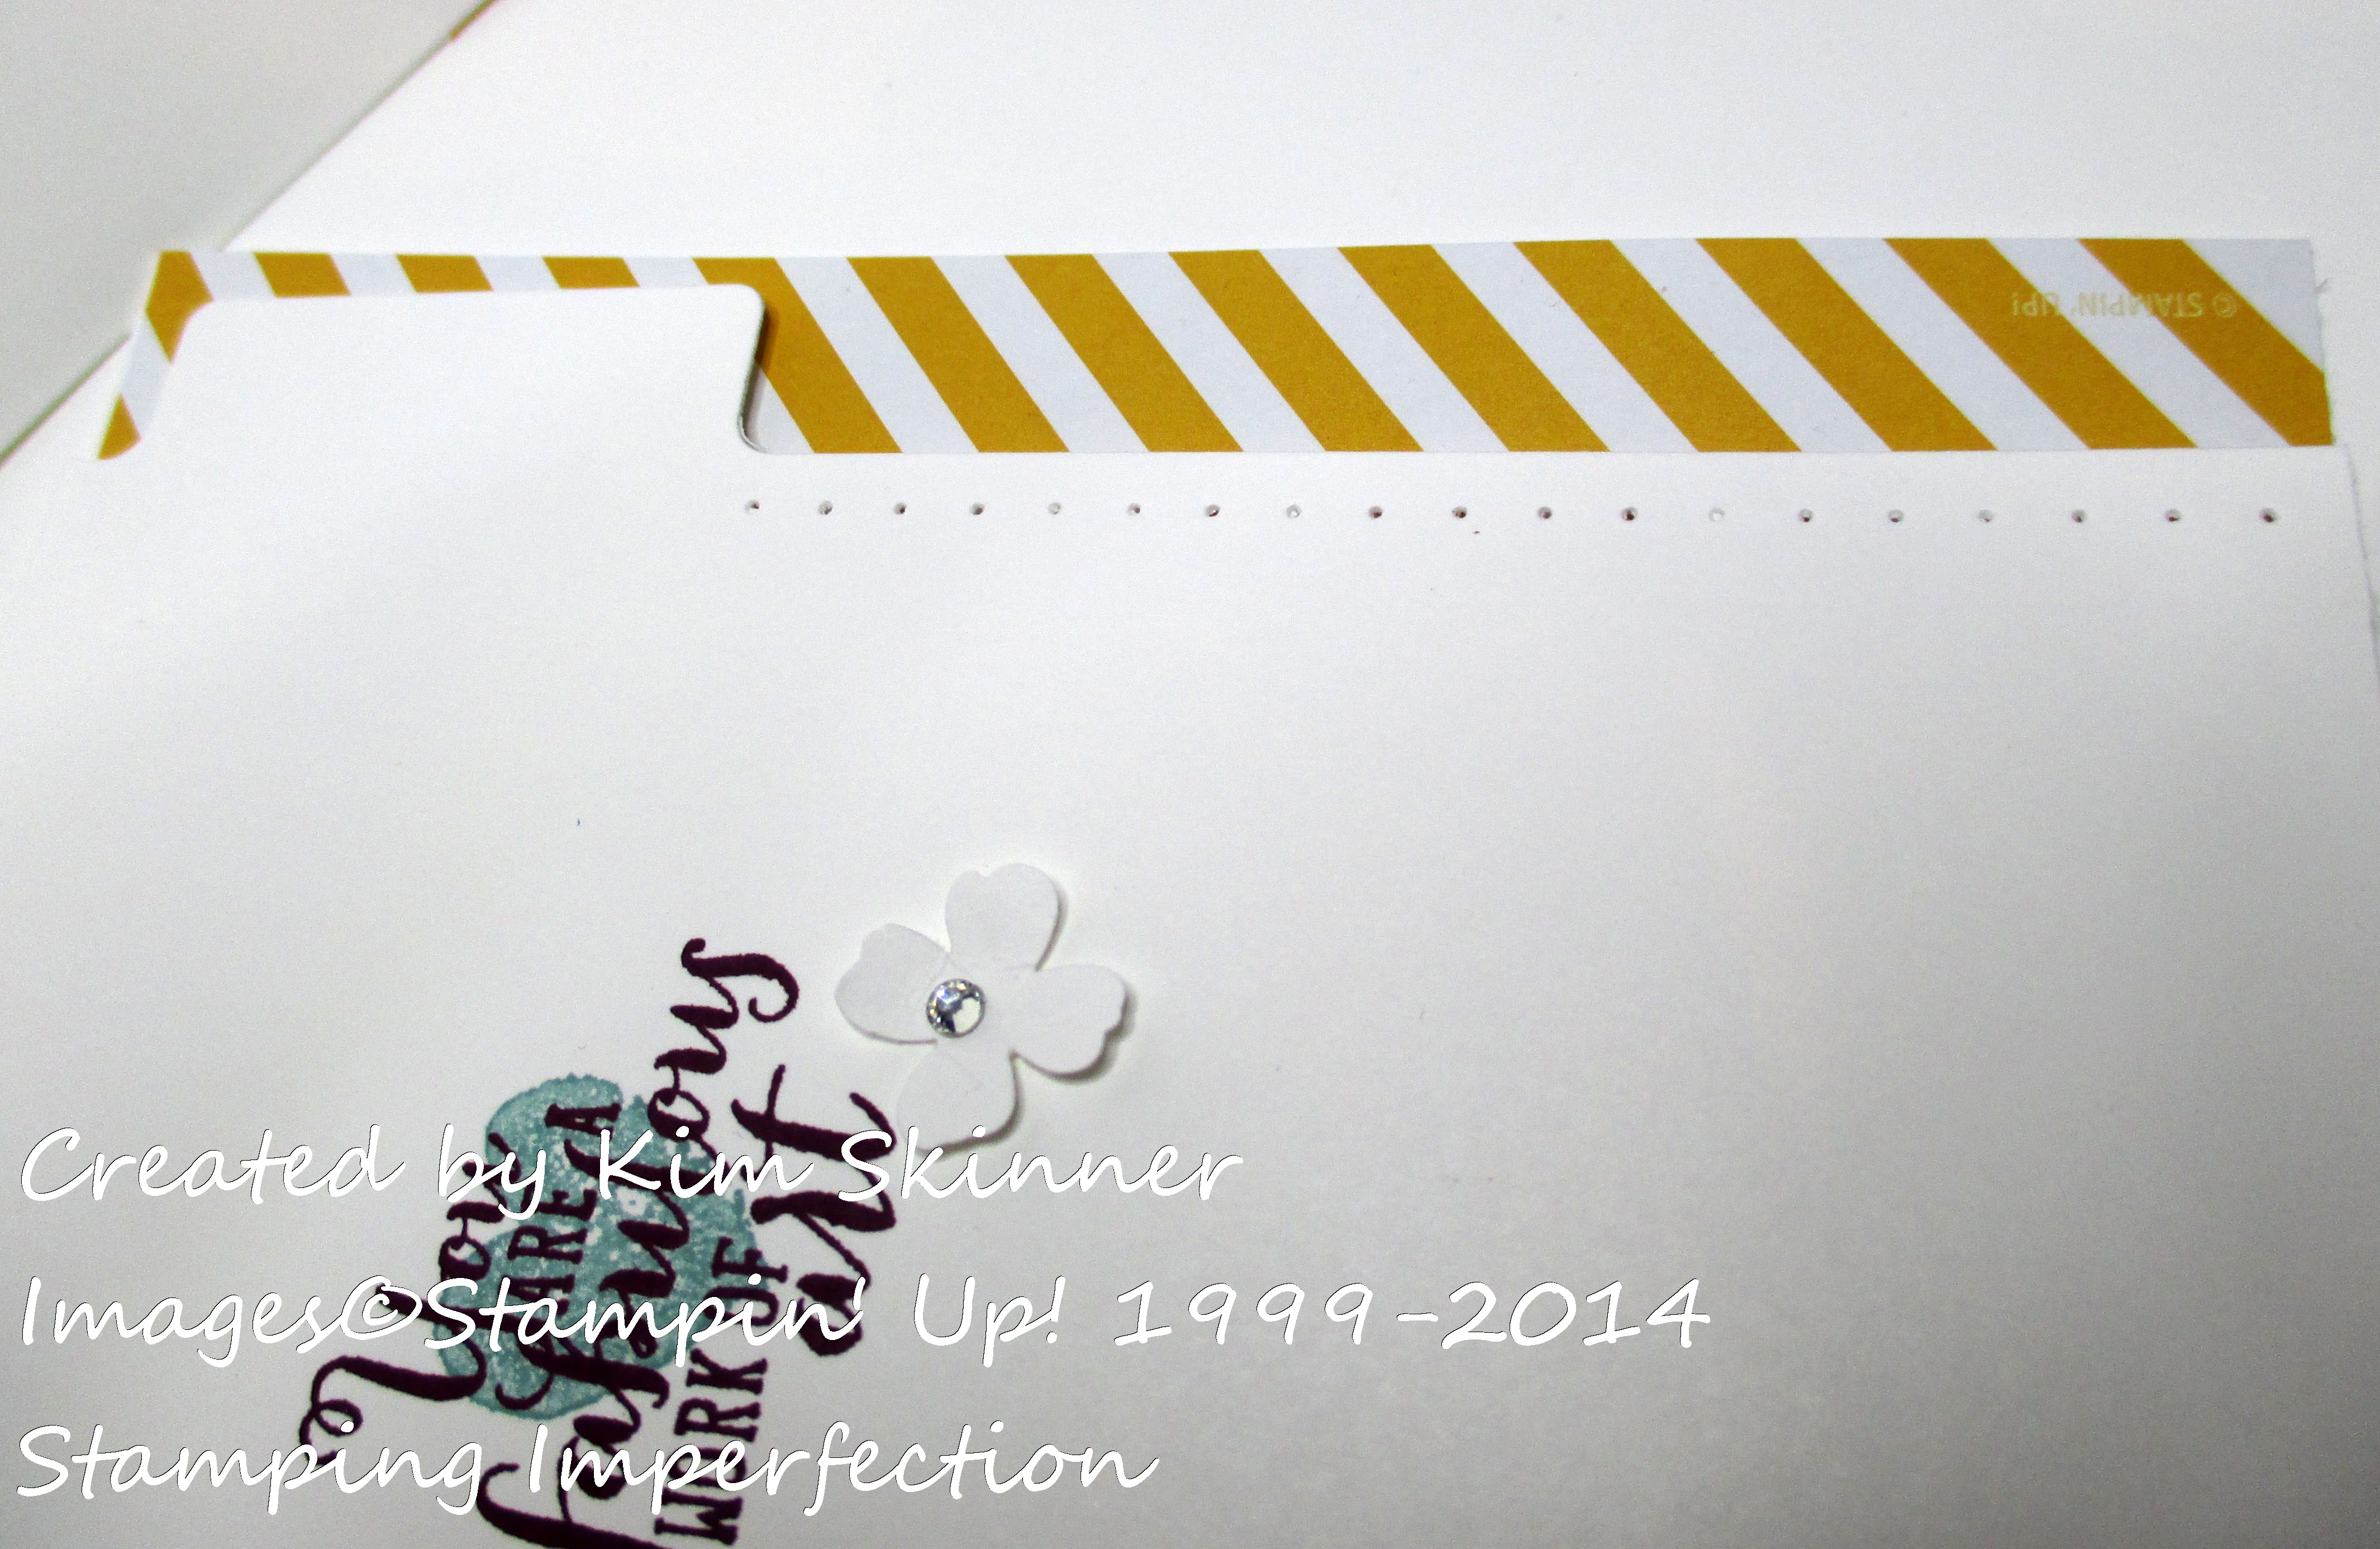 stamping imperfection file tab card